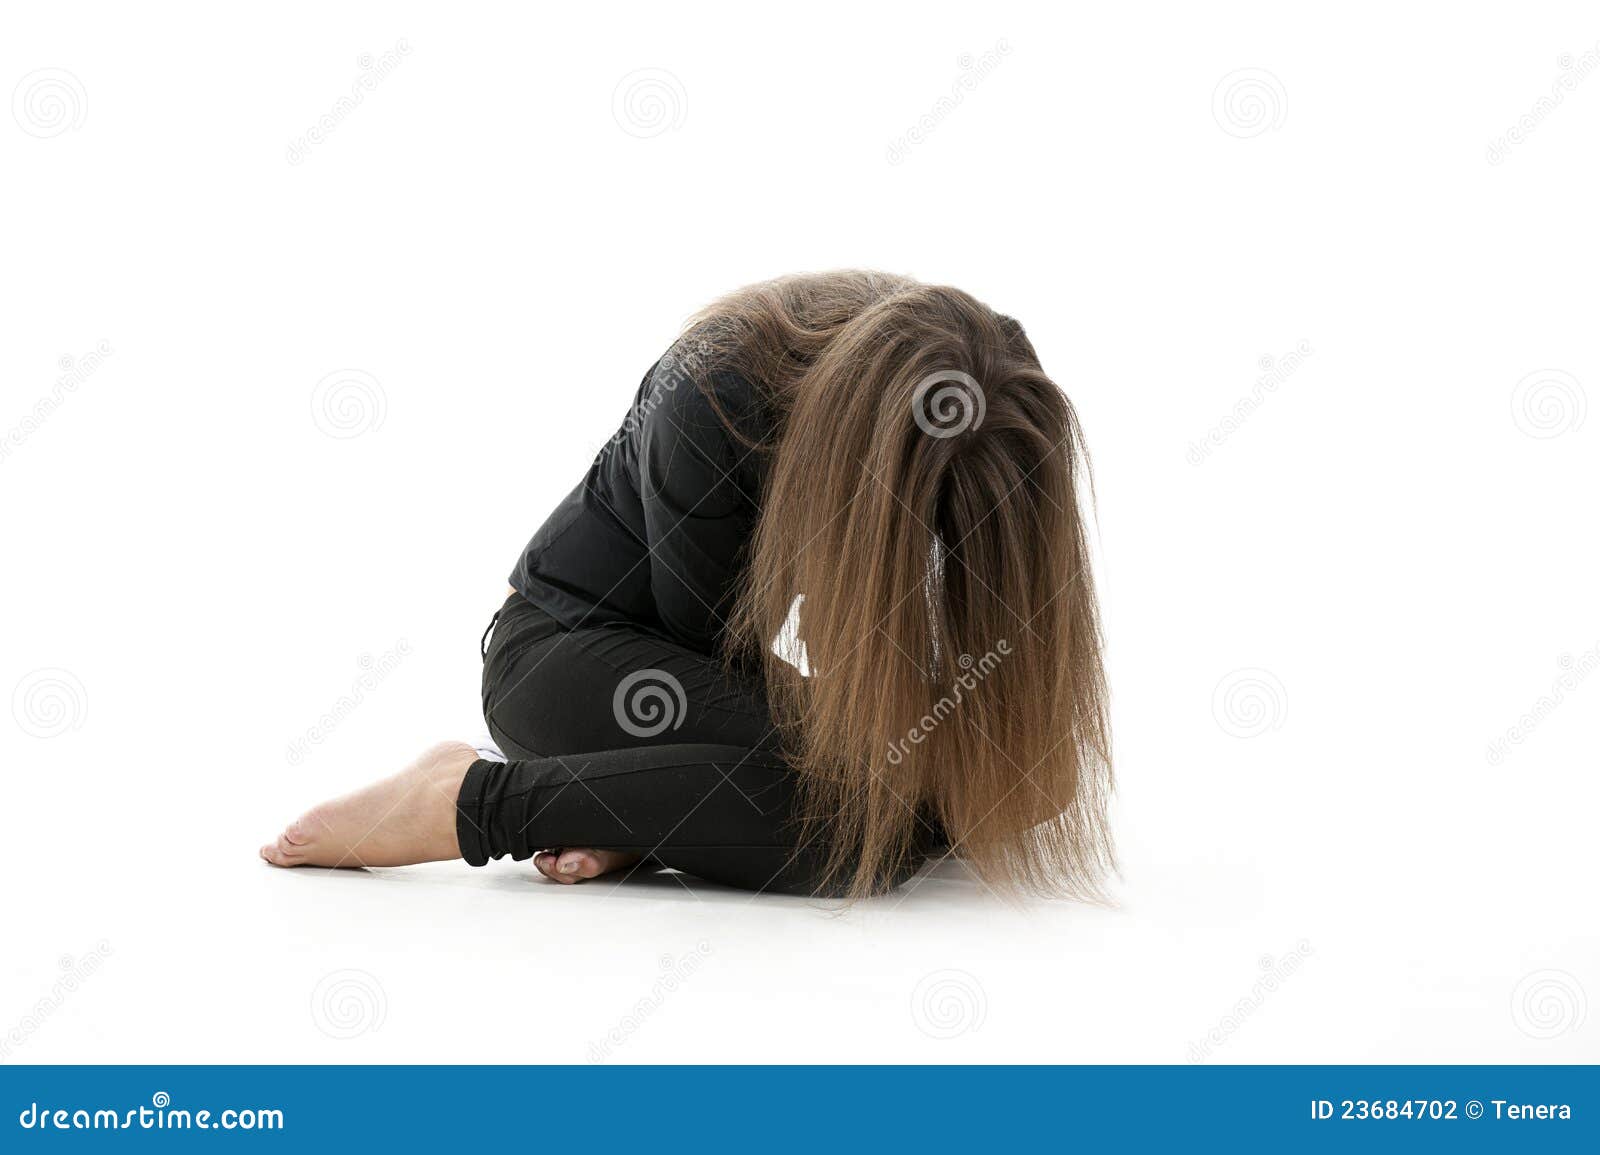 Young Male Dancer Posing In A Crouched Position With His Hands Together And  Looking Into The Camera, Isolated On White Stock Photo, Picture and Royalty  Free Image. Image 17825528.